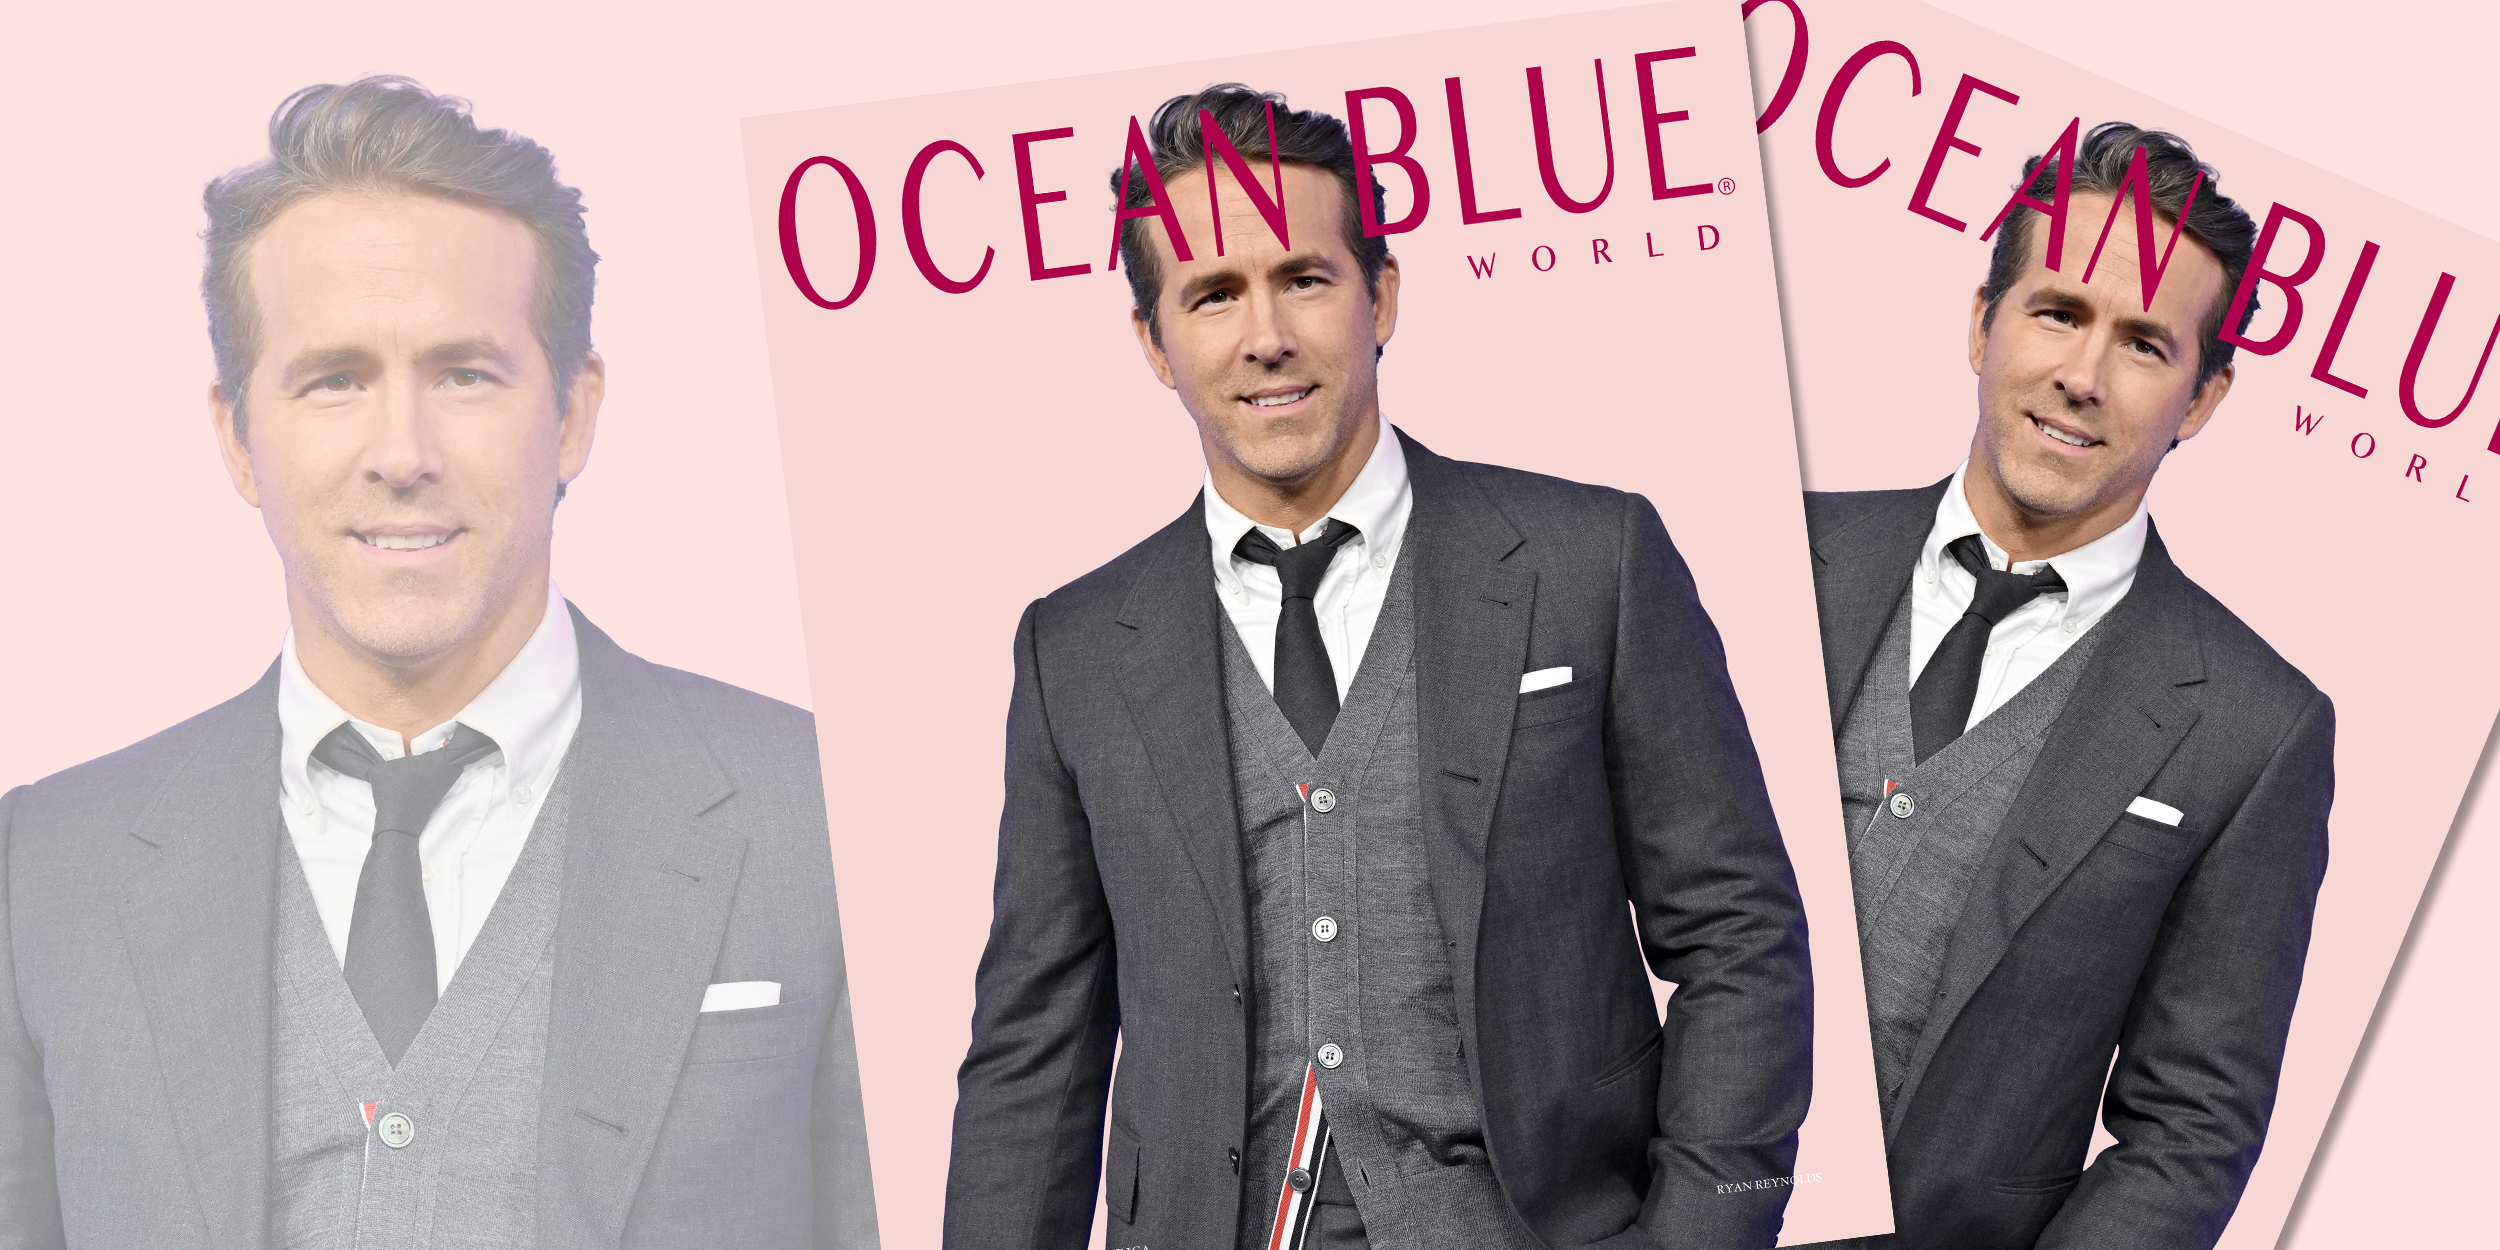 JUST RELEASED! OCEAN BLUE’S 32ND EDITION!